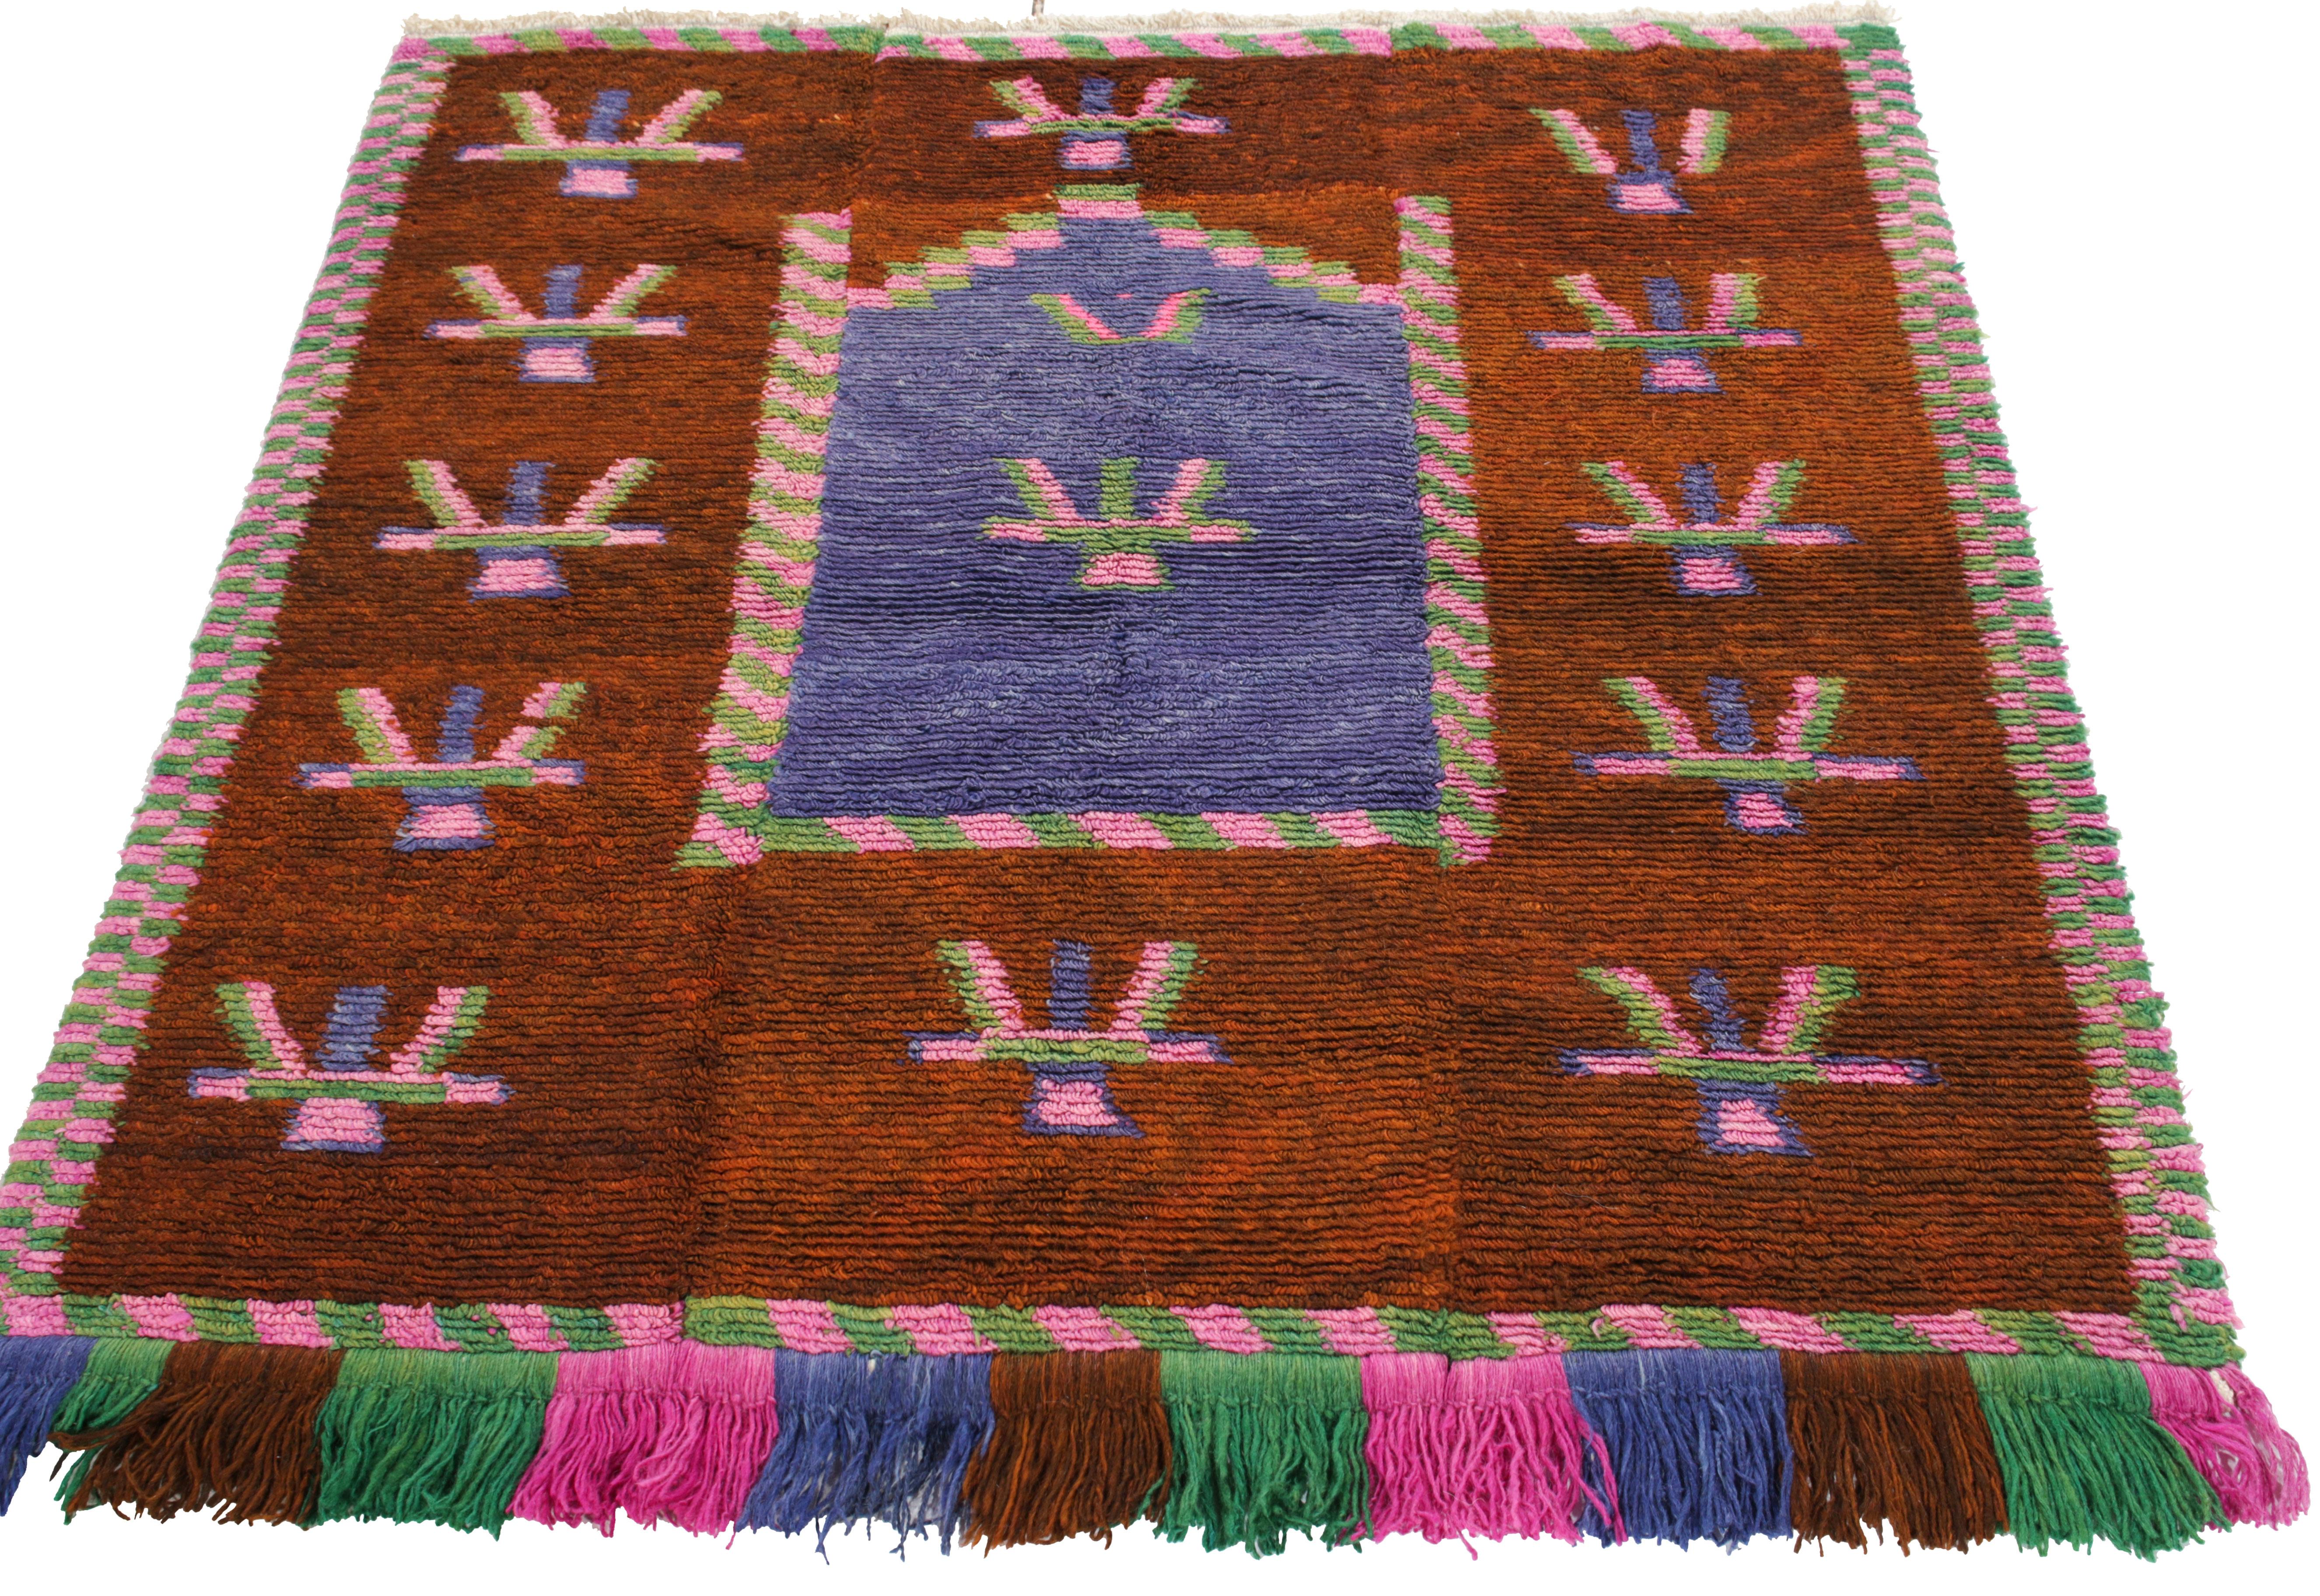 Hand-knotted in wool, a vintage Tulu originating from Turkey circa 1950-1960, now joining Rug & Kilim’s Antique & Vintage collection. The square sketch emanates nomadic sensibilities with traditional motifs in pink, green & blue sitting harmoniously